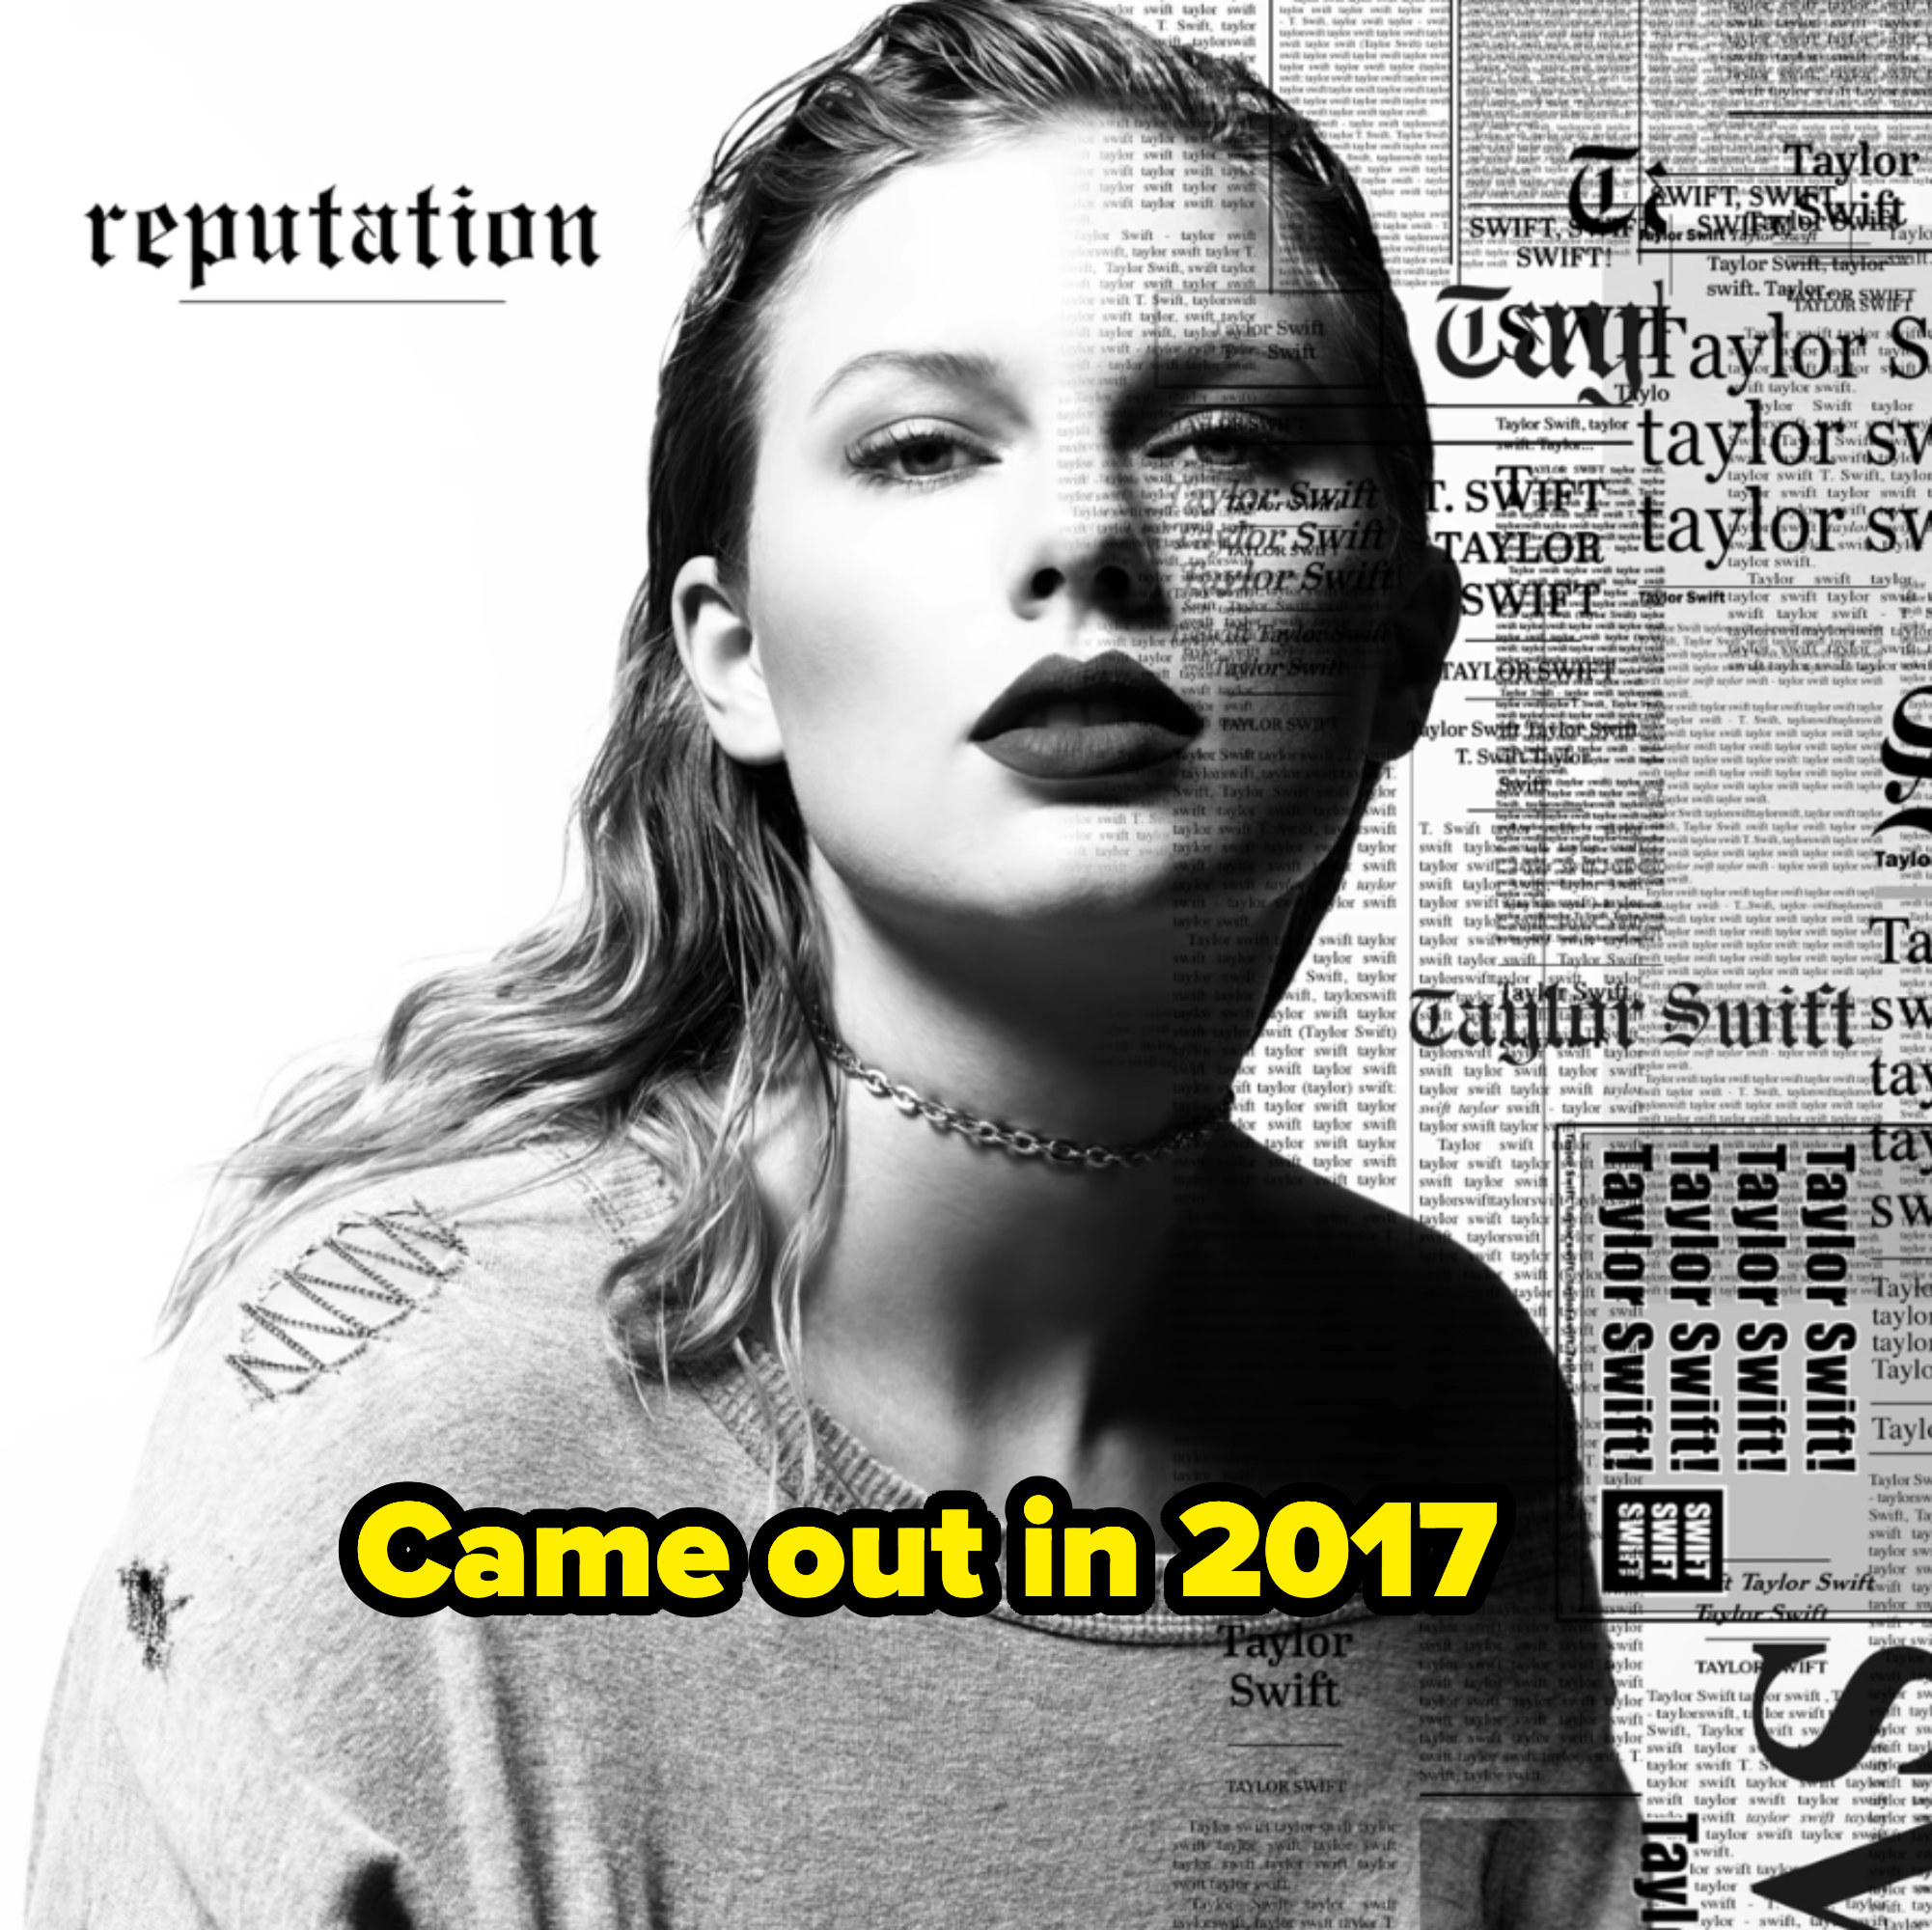 Came out in 2017 written over Taylor Swift&#x27;s album Reputation